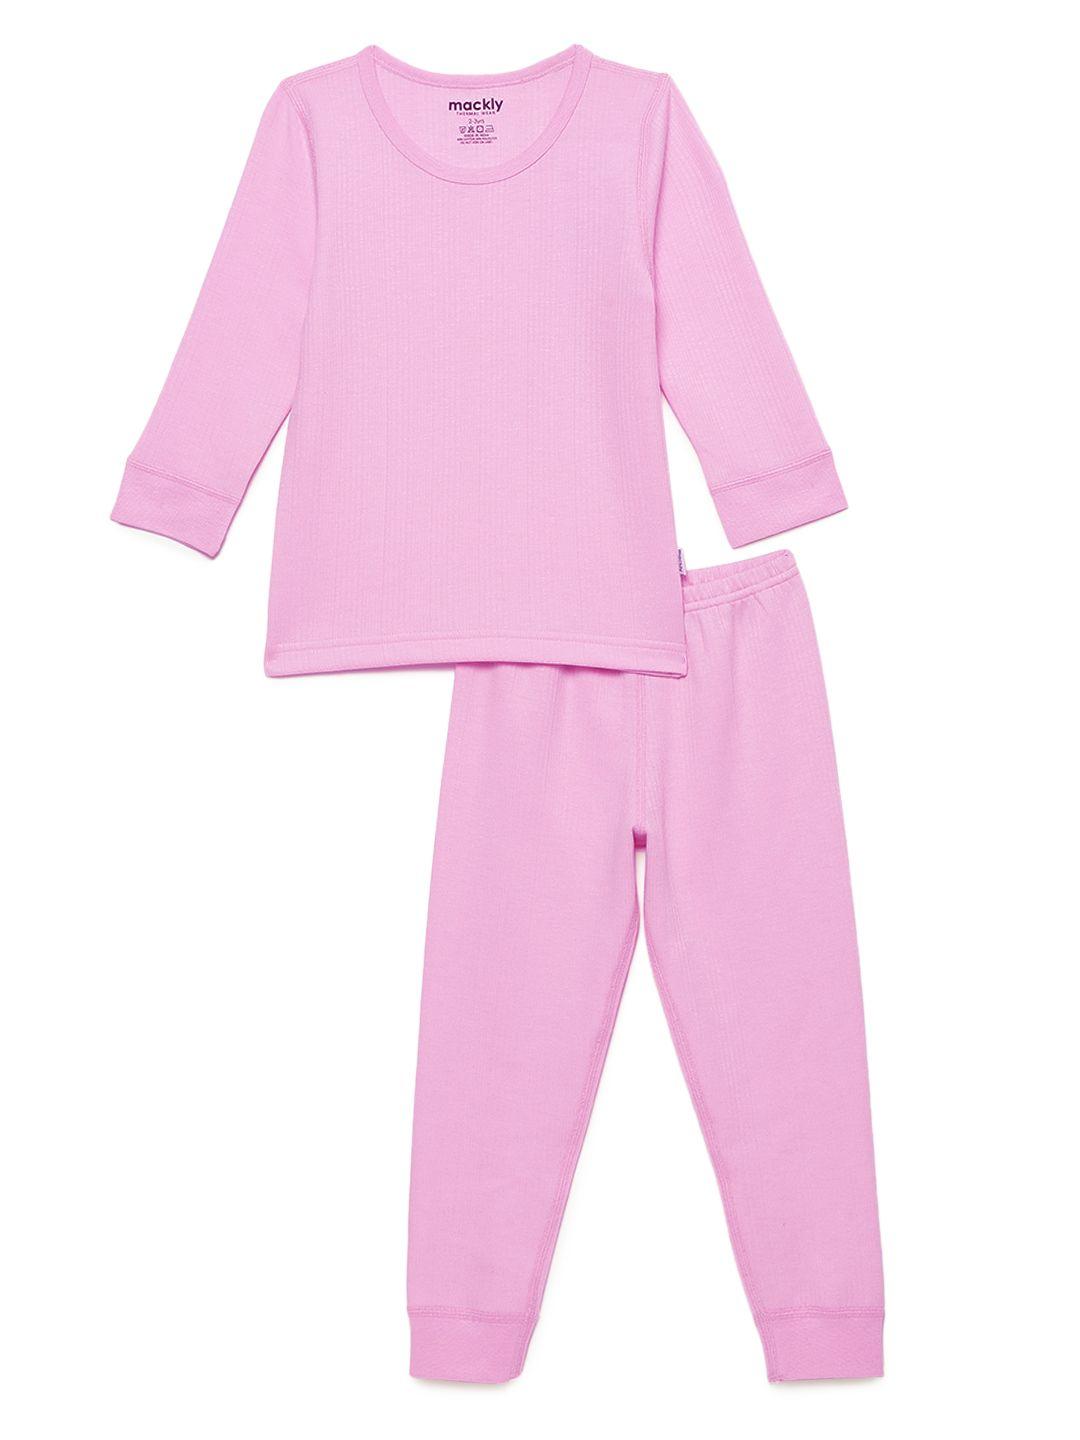 mackly infant pink solid thermal set